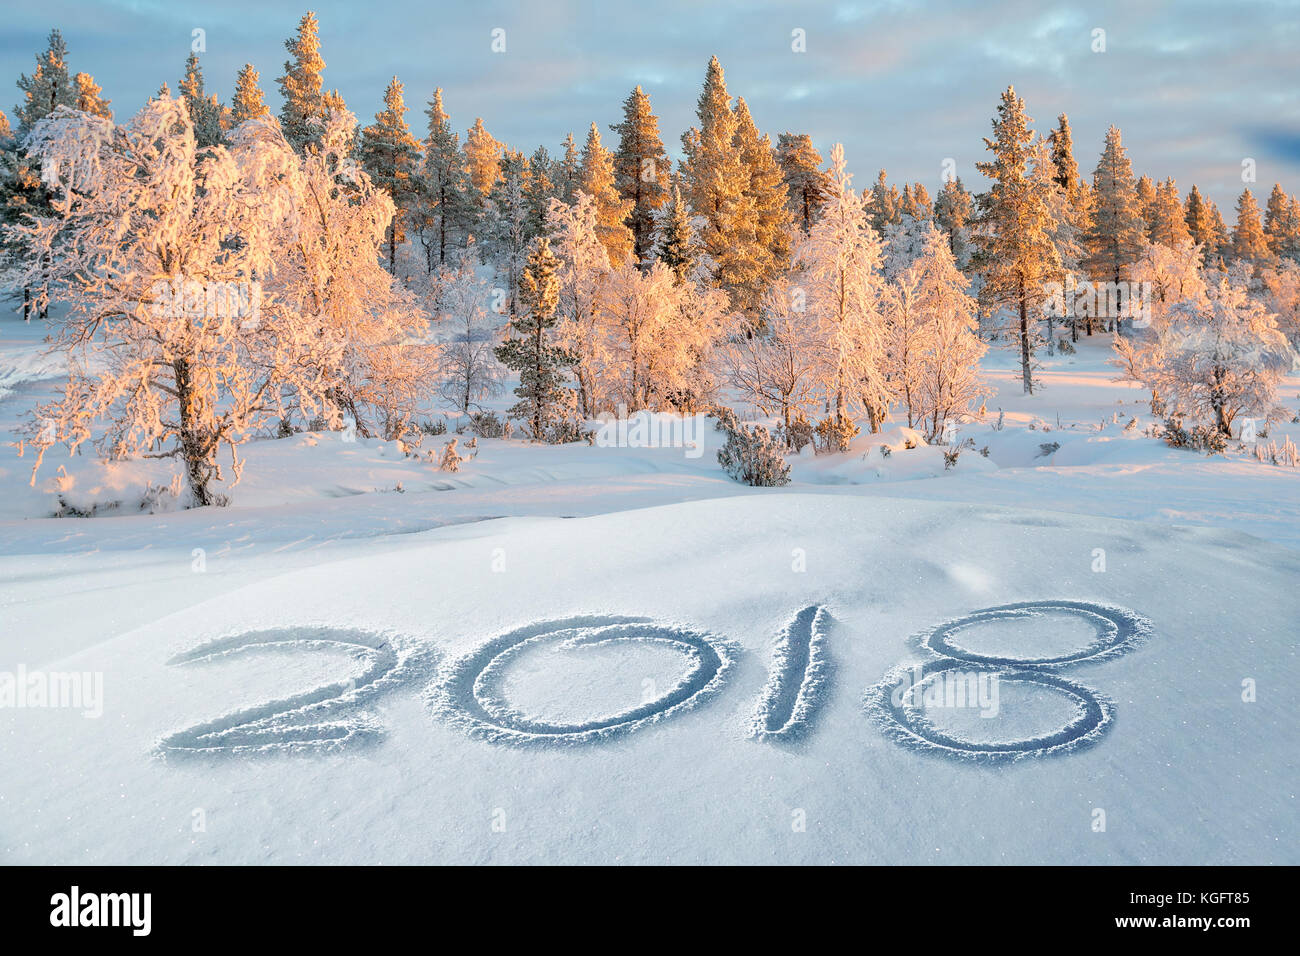 2018 written in the snow, snowy trees landscape in the background Stock Photo